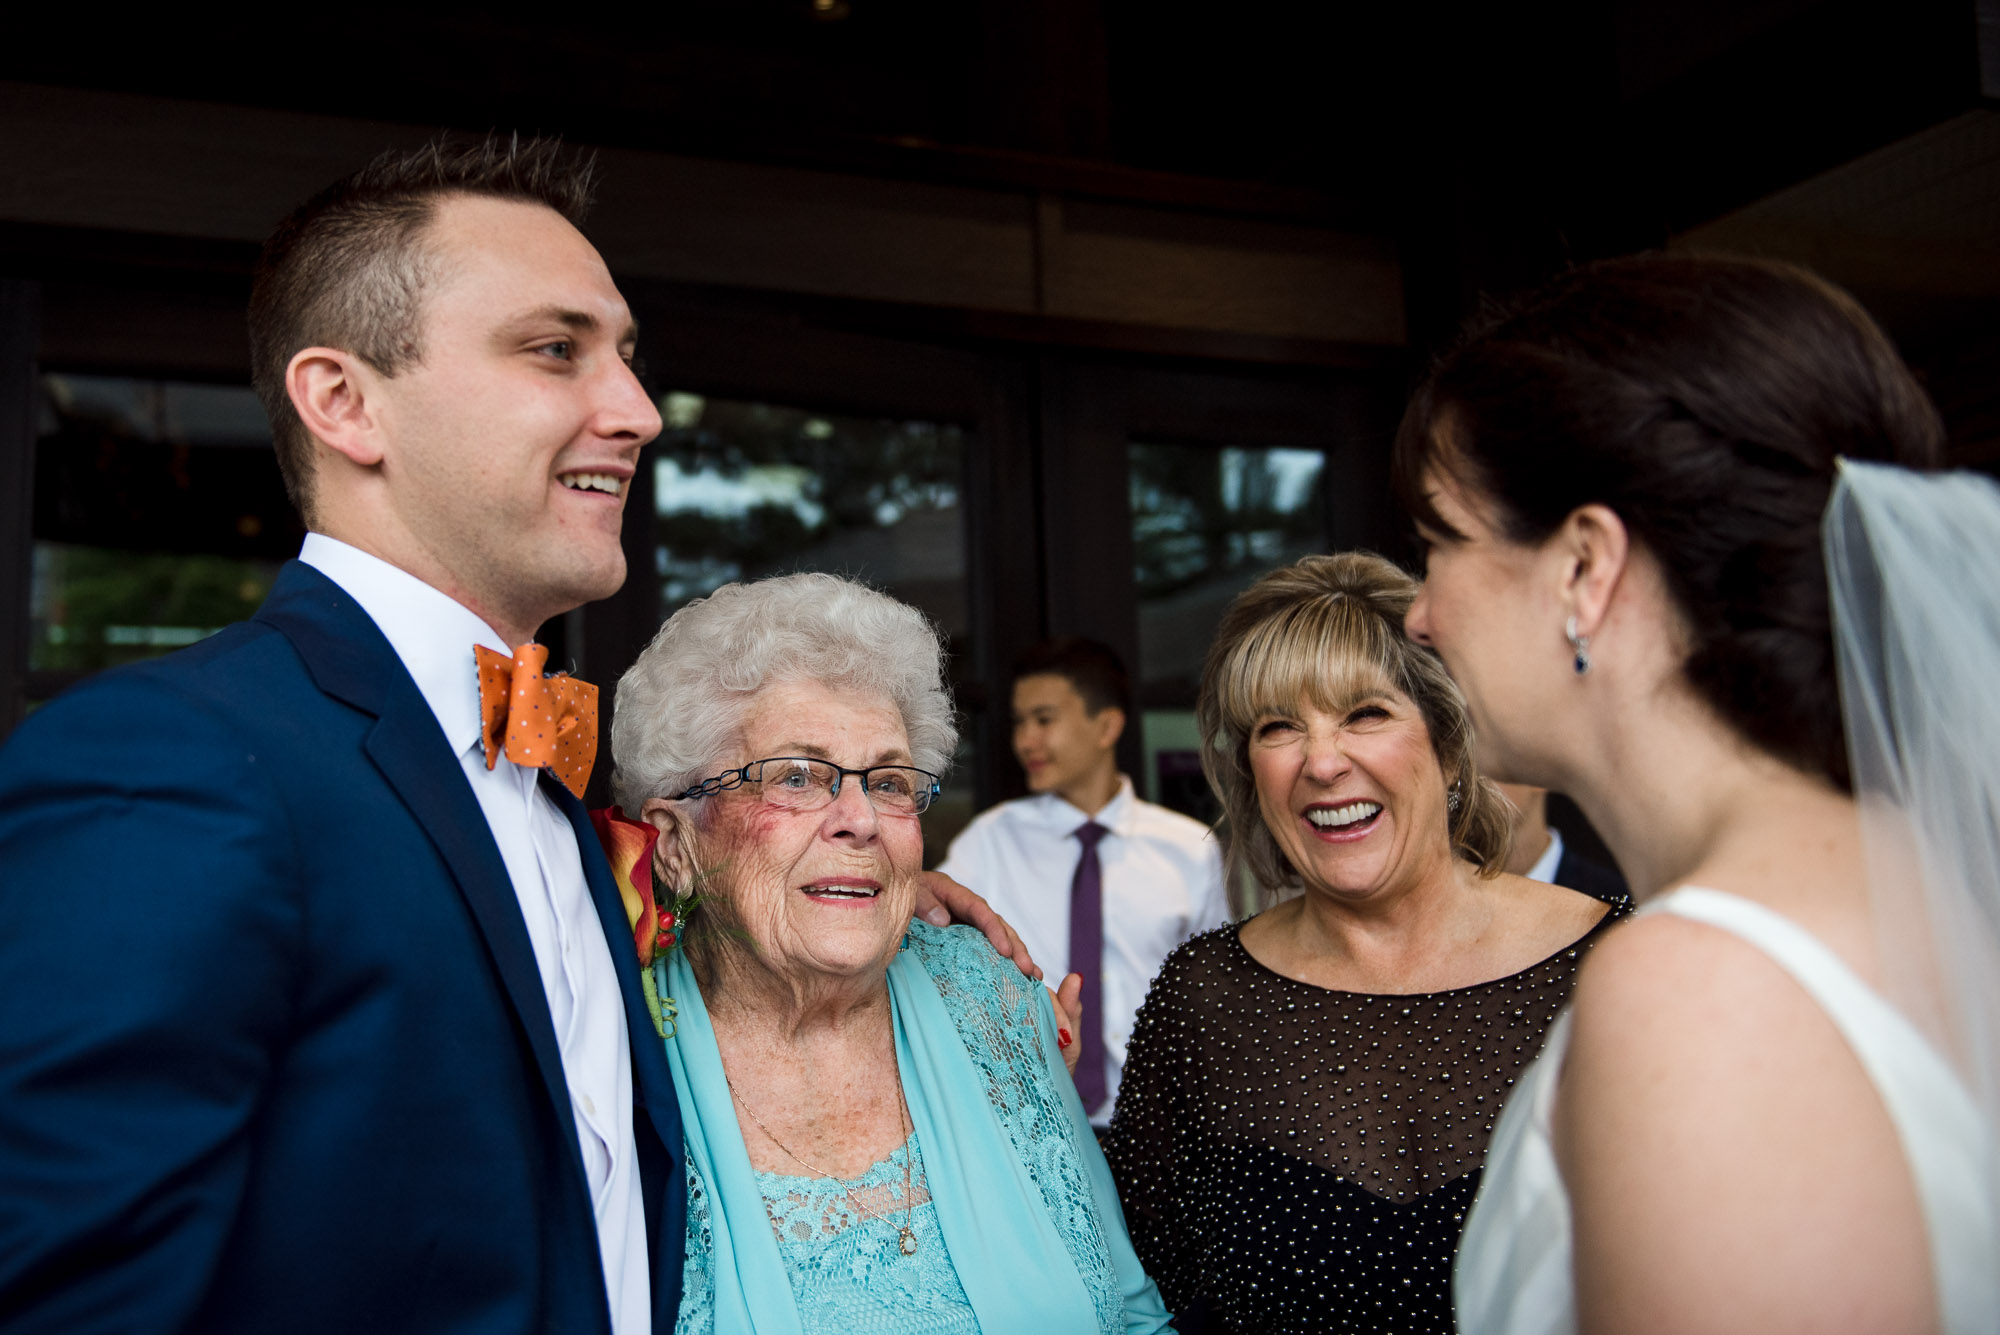 Moments after a wedding ceremony at Predator Ridge resort with parents and grandparents